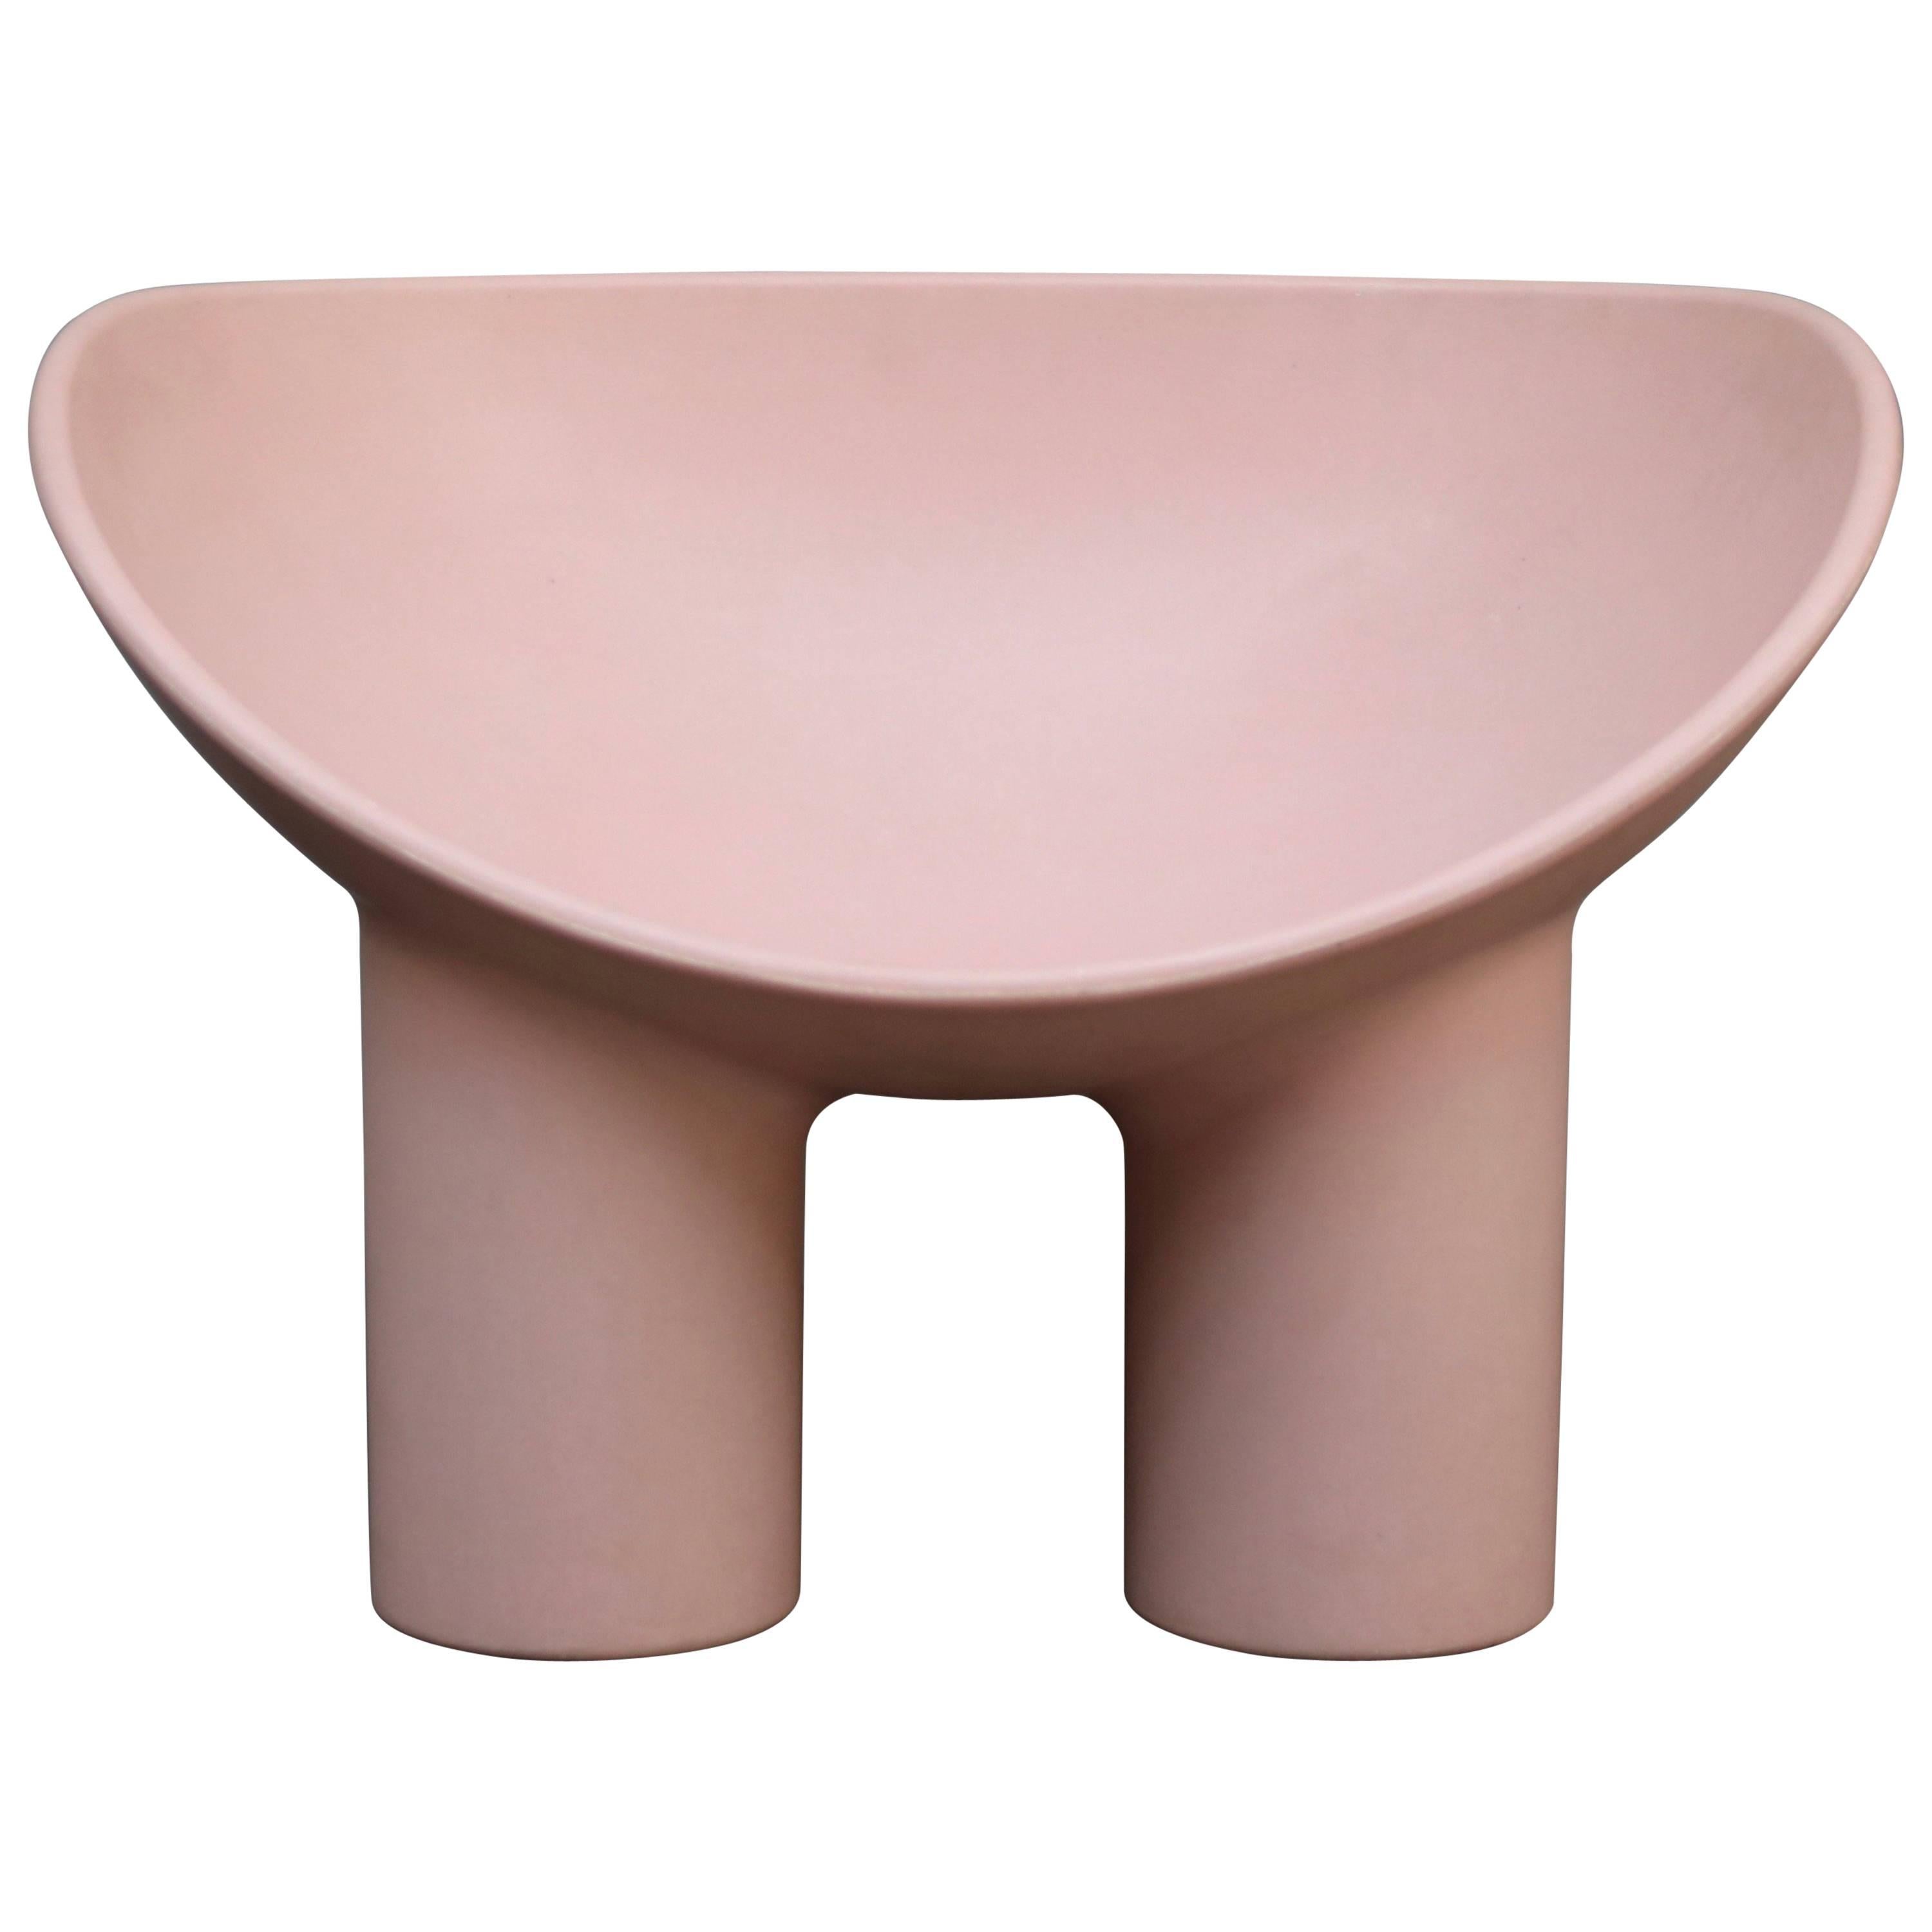 Faye Toogood Roly Poly Chair in Pink from 2016